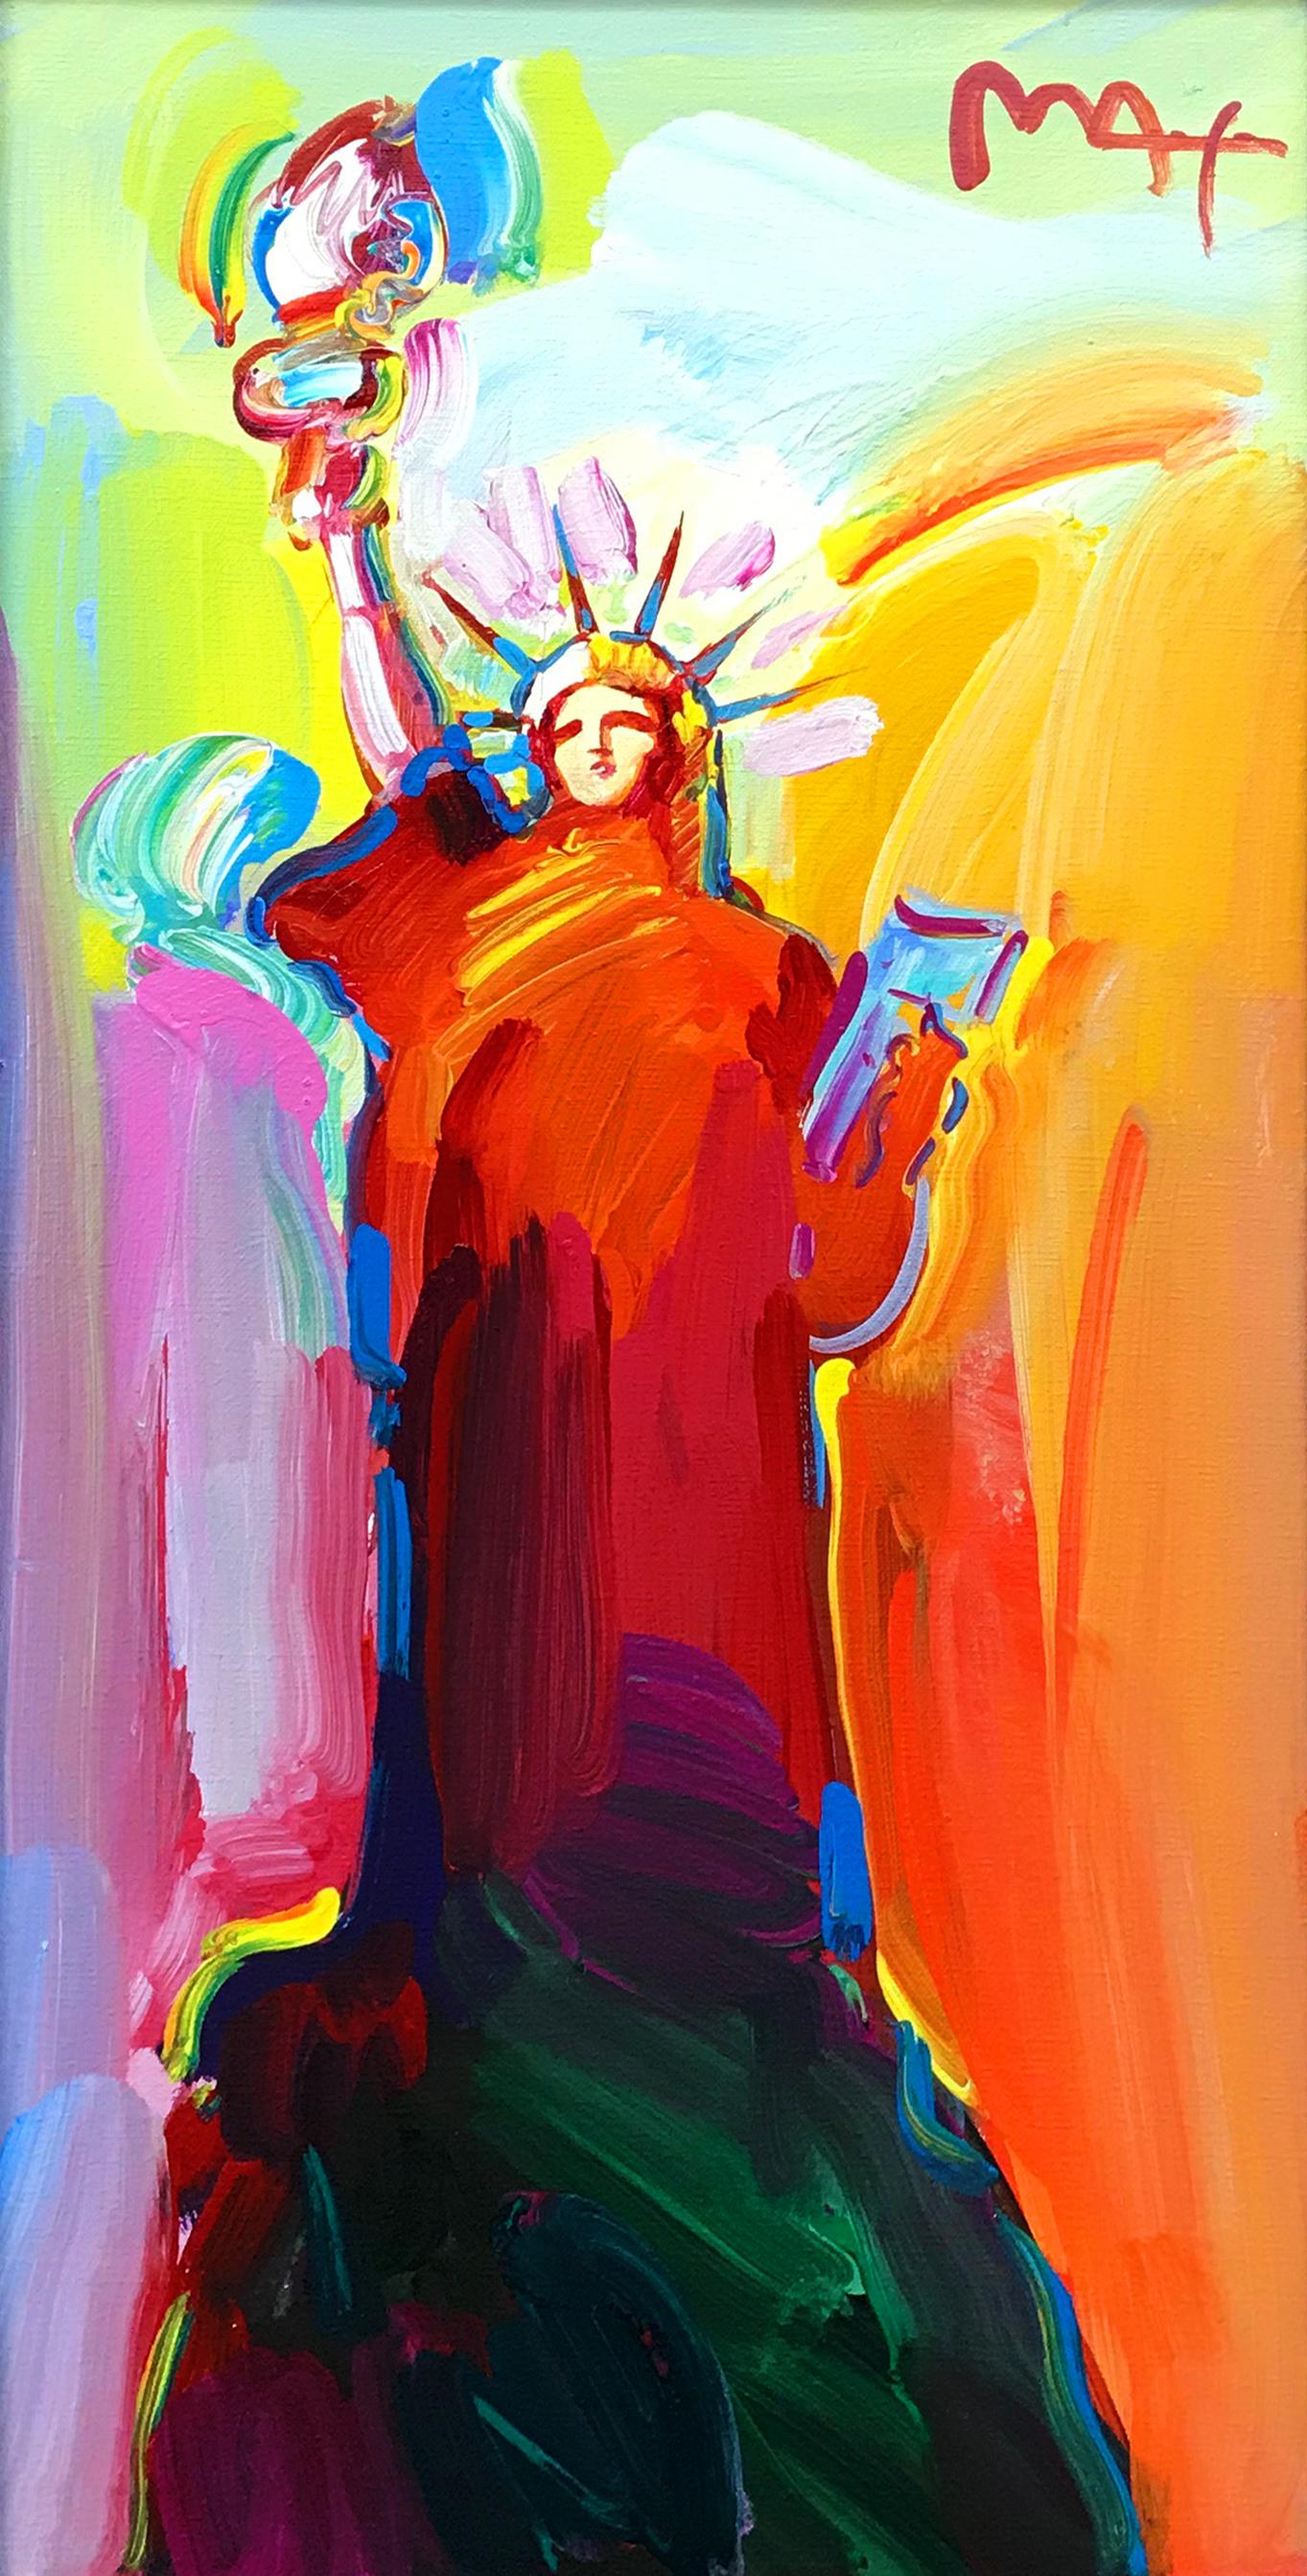 STATUE OF LIBERTY - Painting by Peter Max